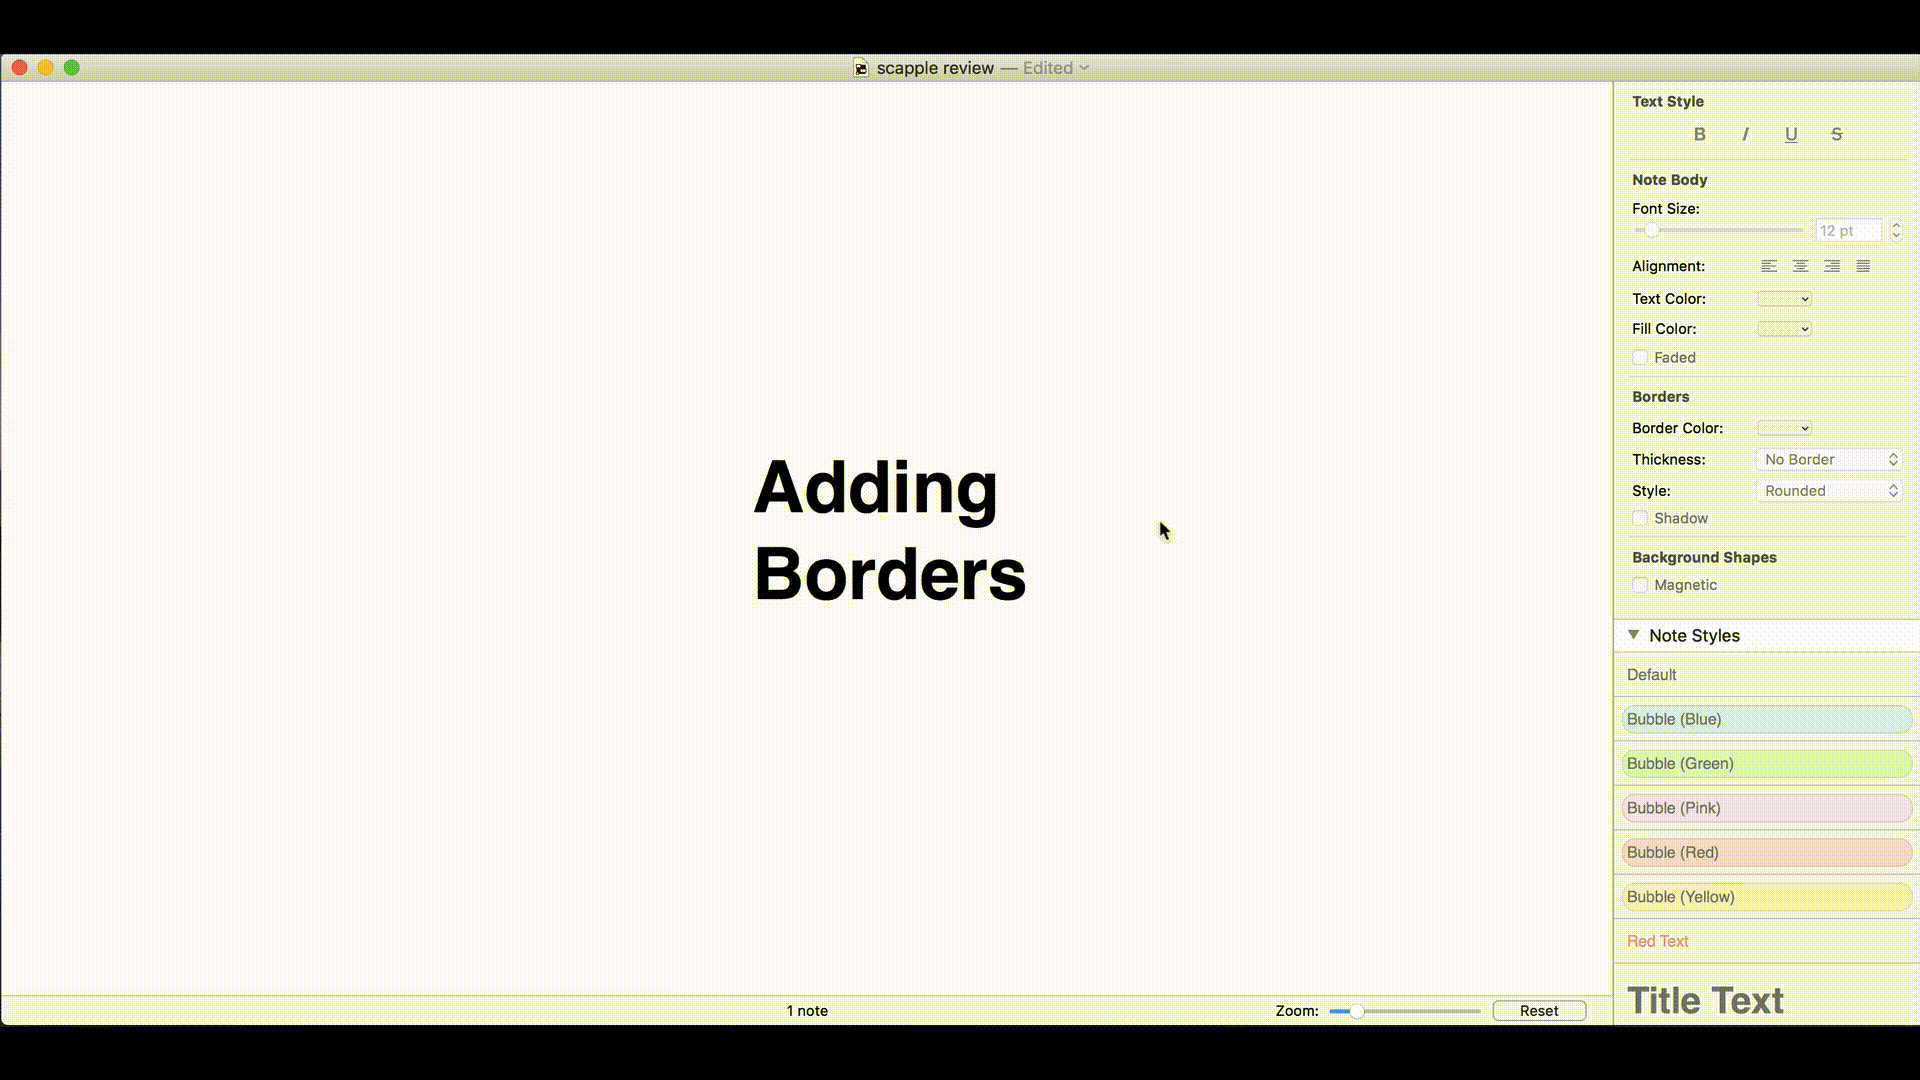 adding borders to notes in Scapple